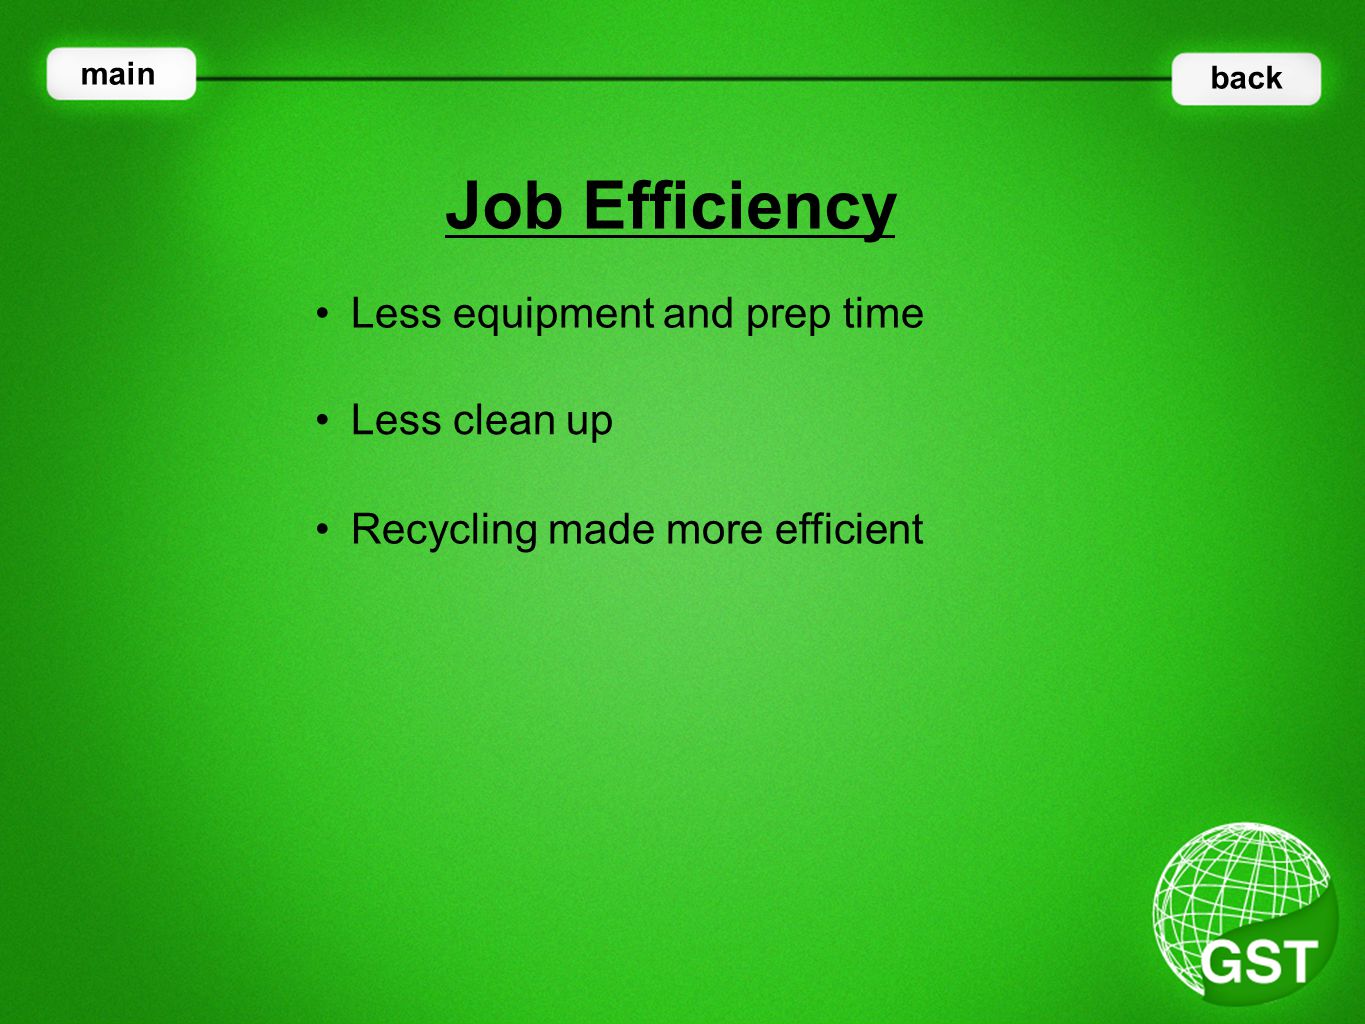 Less equipment and prep time Job Efficiency main back Less clean up Recycling made more efficient